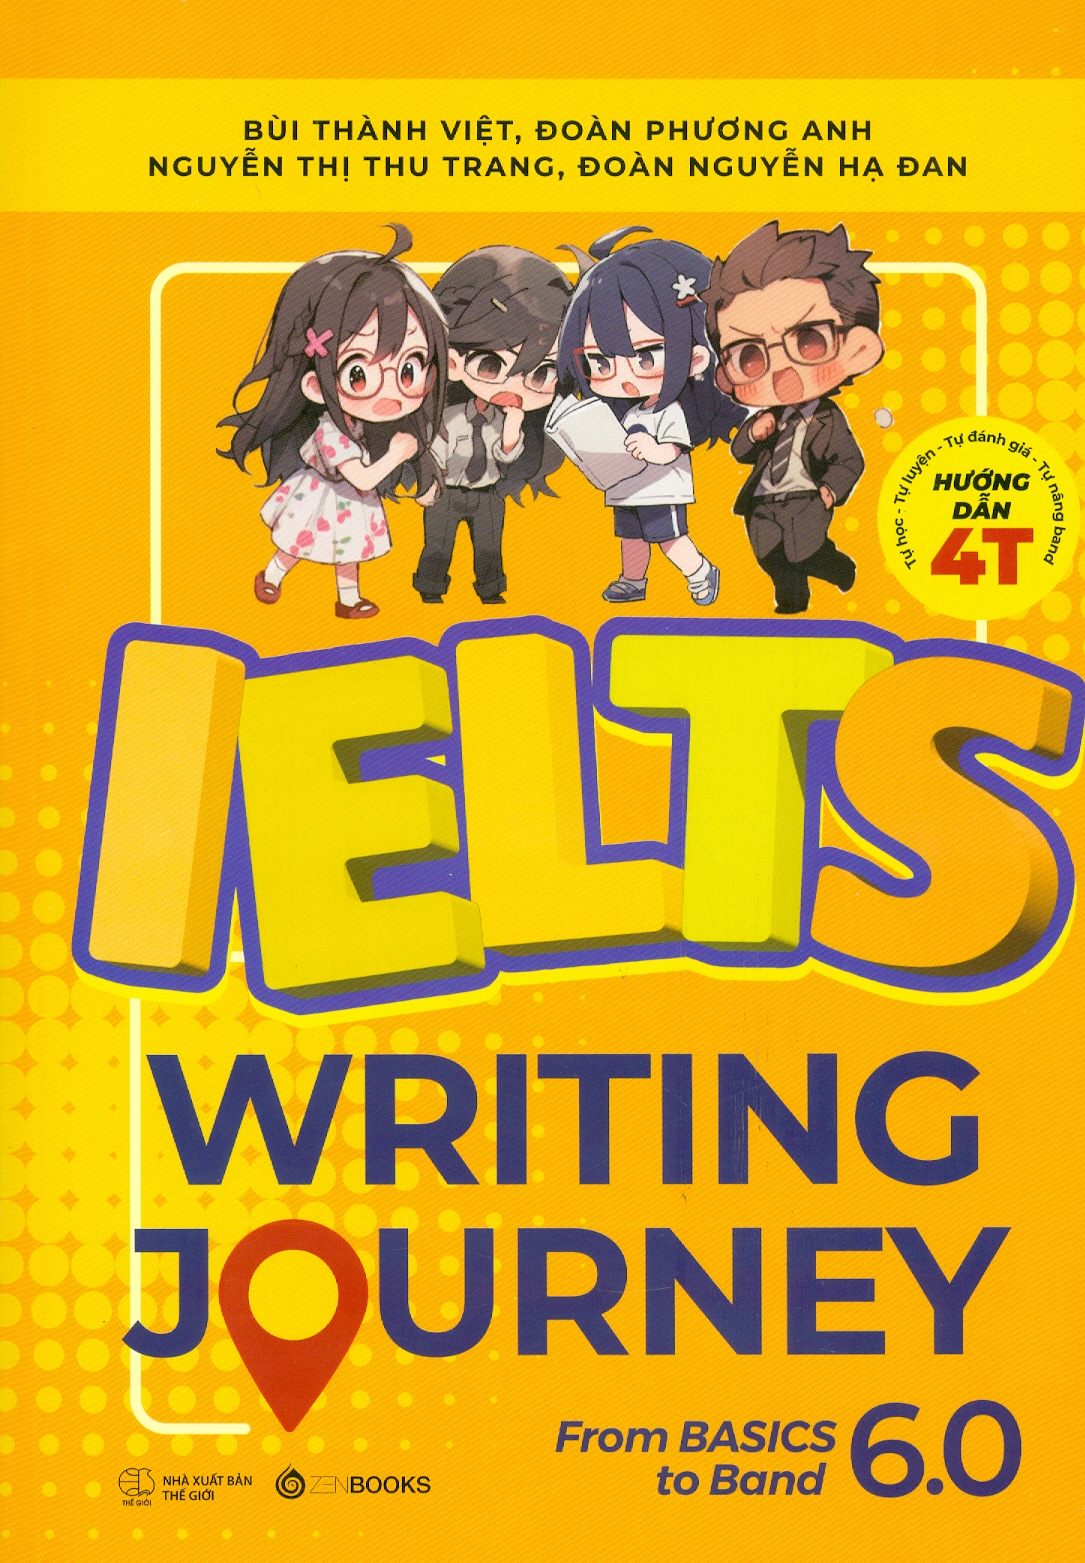 Ielts Writing Journey From Basics To Band 6.0 - Bản Quyền